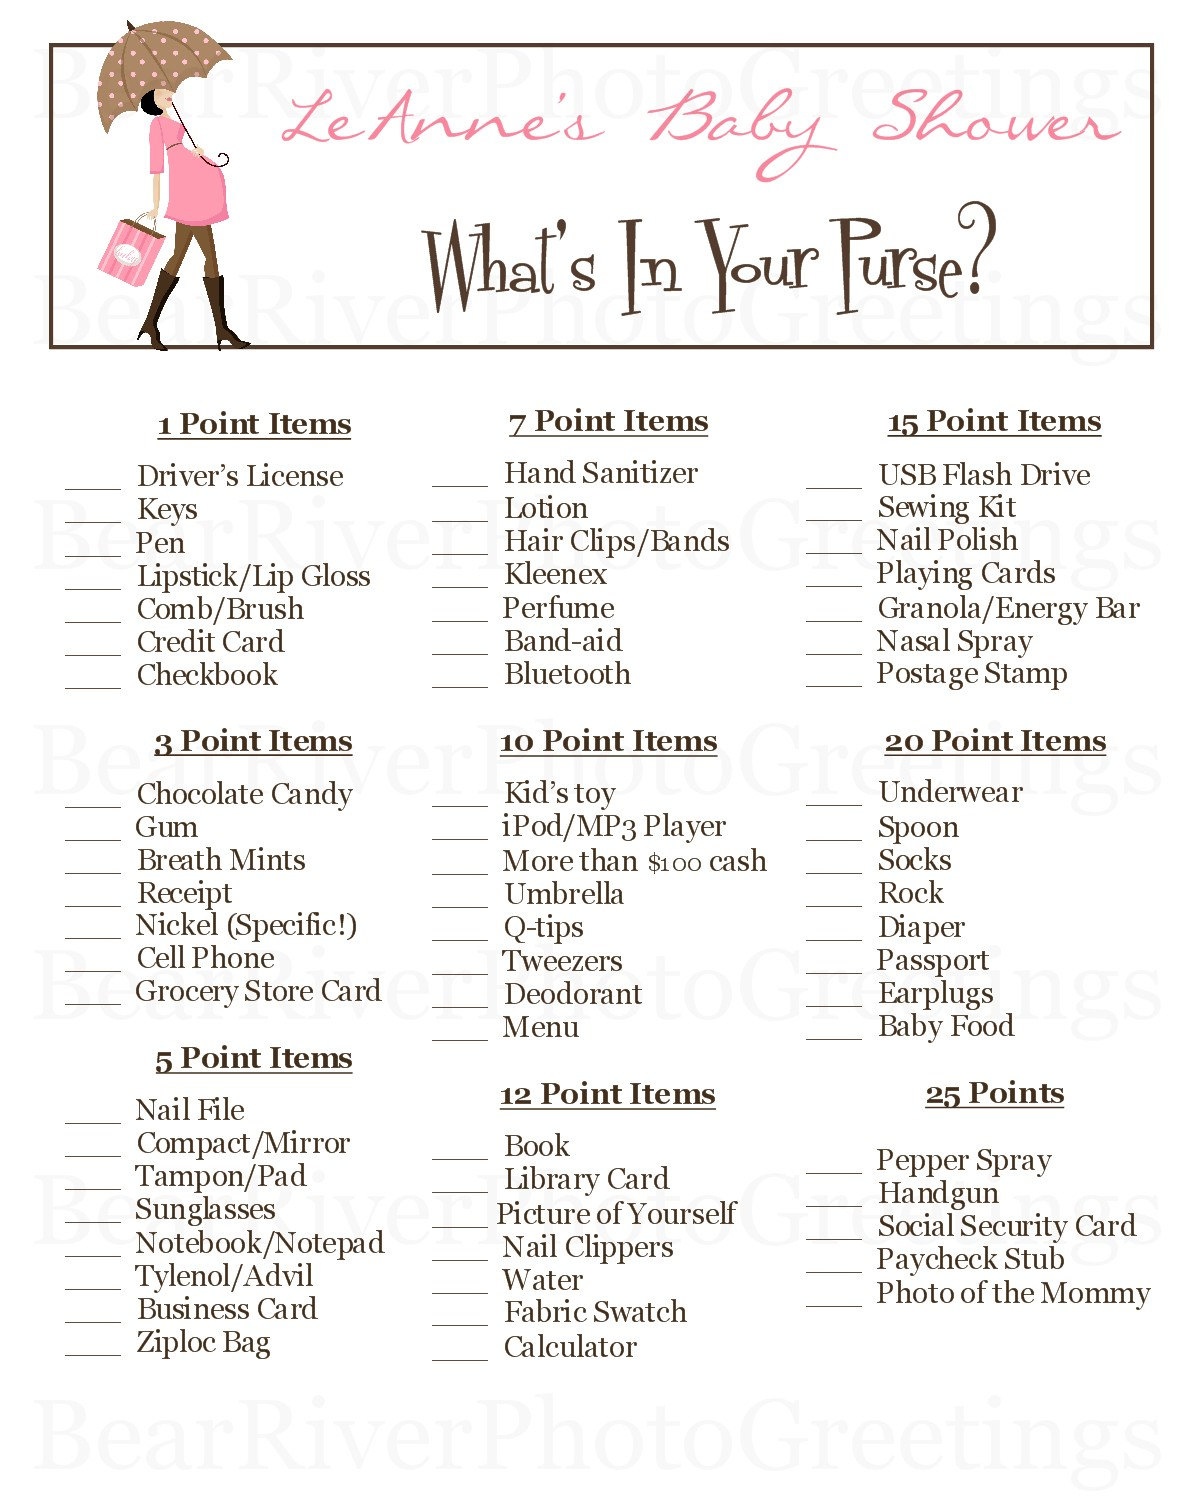 Baby Shower Food Ideas: Baby Shower Ideas Printable Games - Free Printable Baby Shower Games What&amp;#039;s In Your Purse